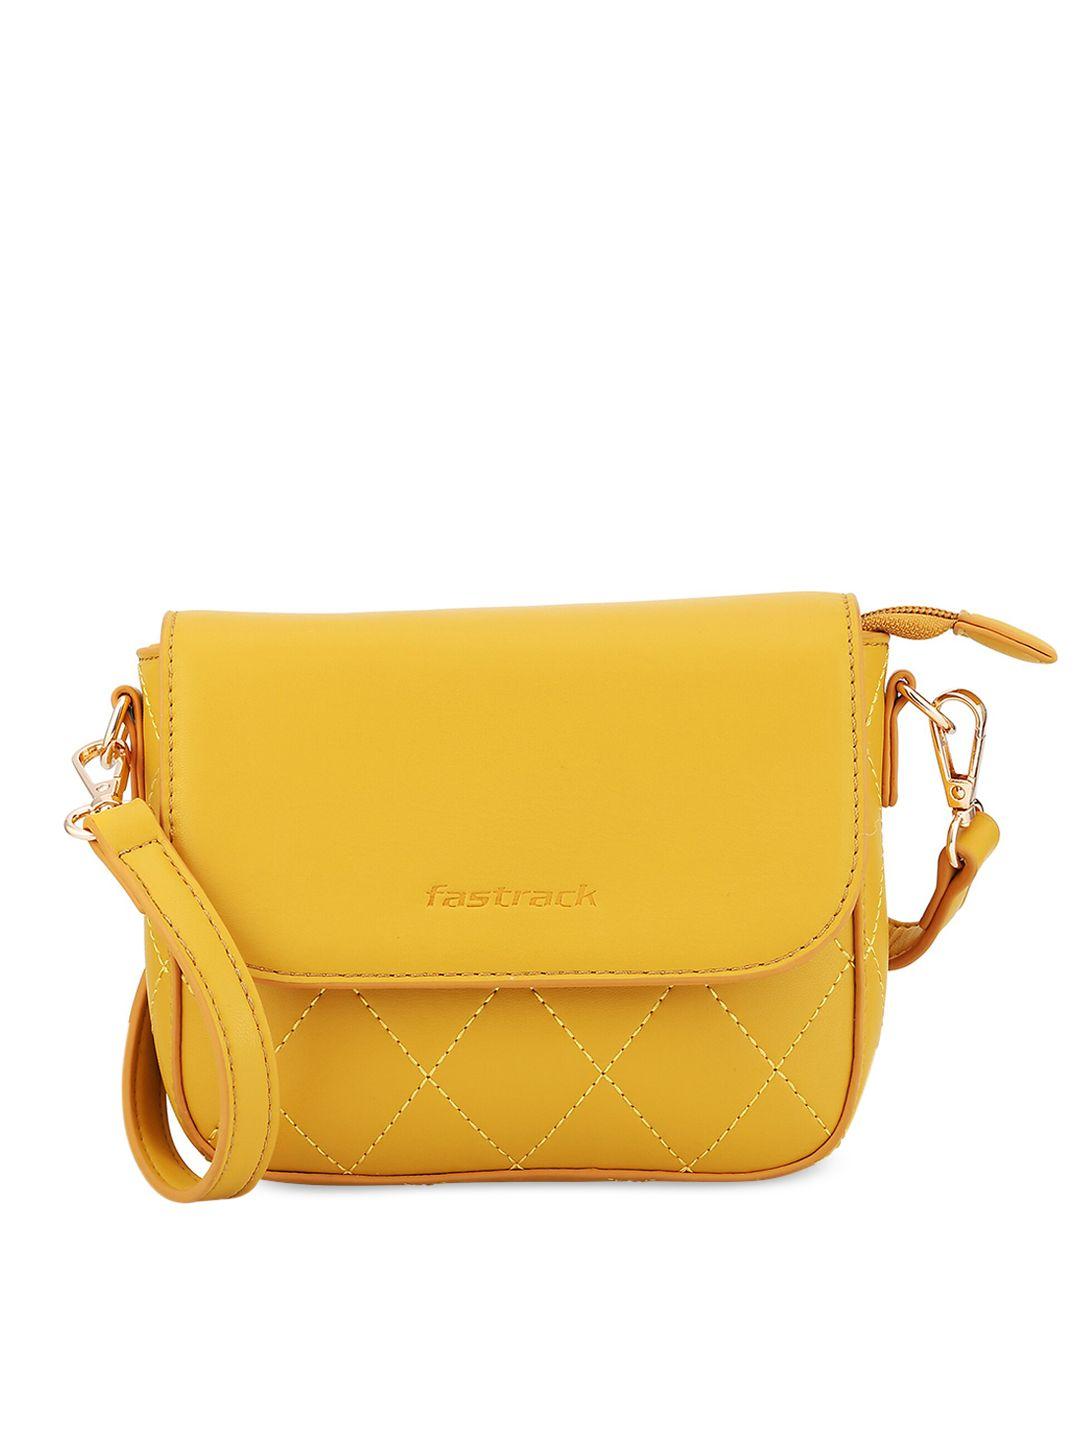 fastrack quilted structured sling bag